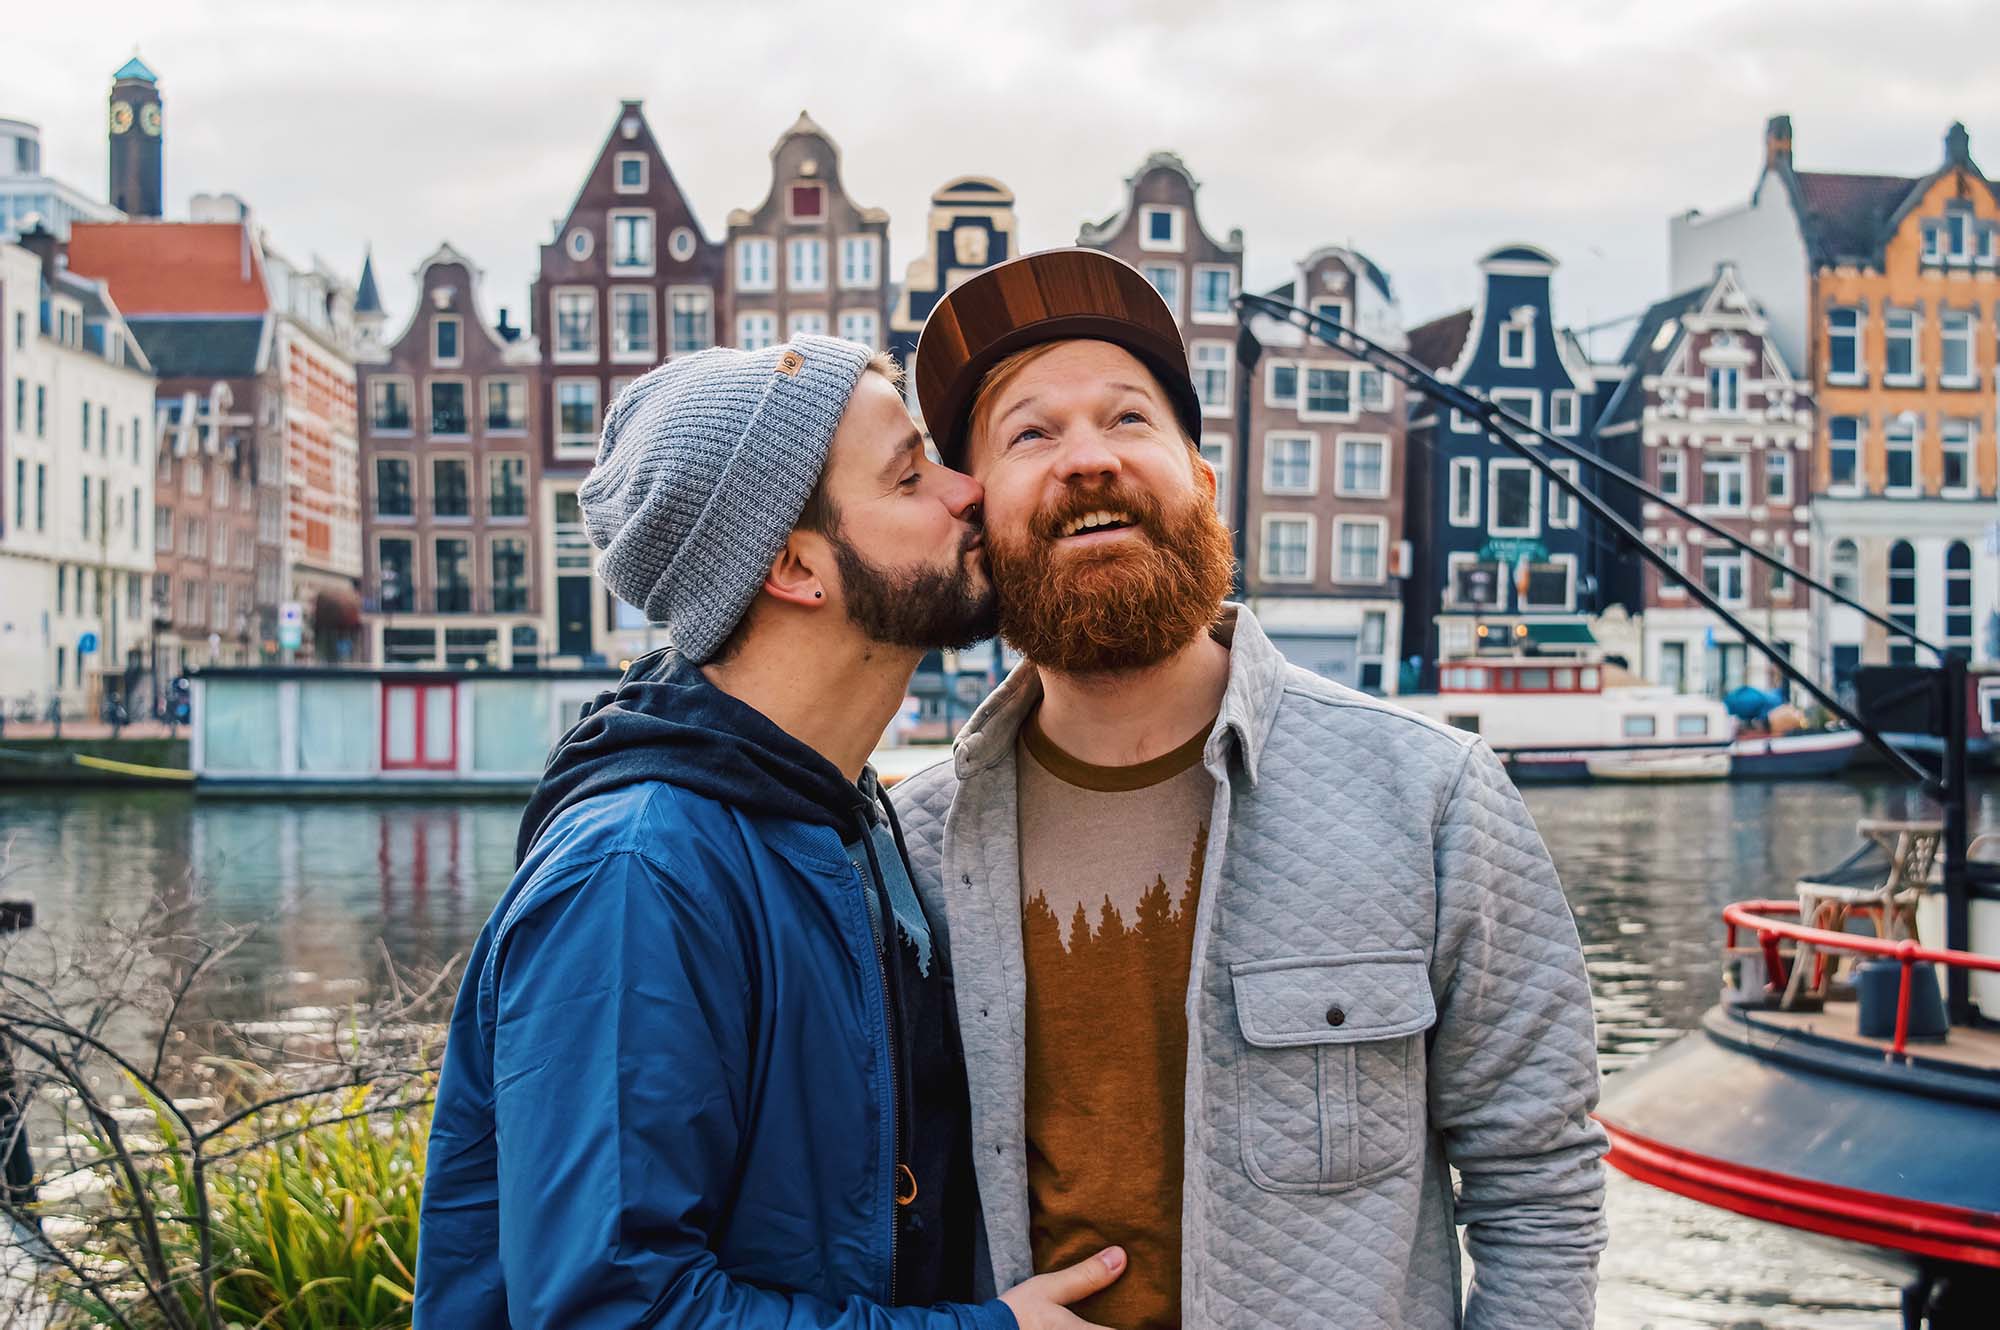 About Couple of Men | The Gay Travel Bloggers behind the Gay Couple Blog